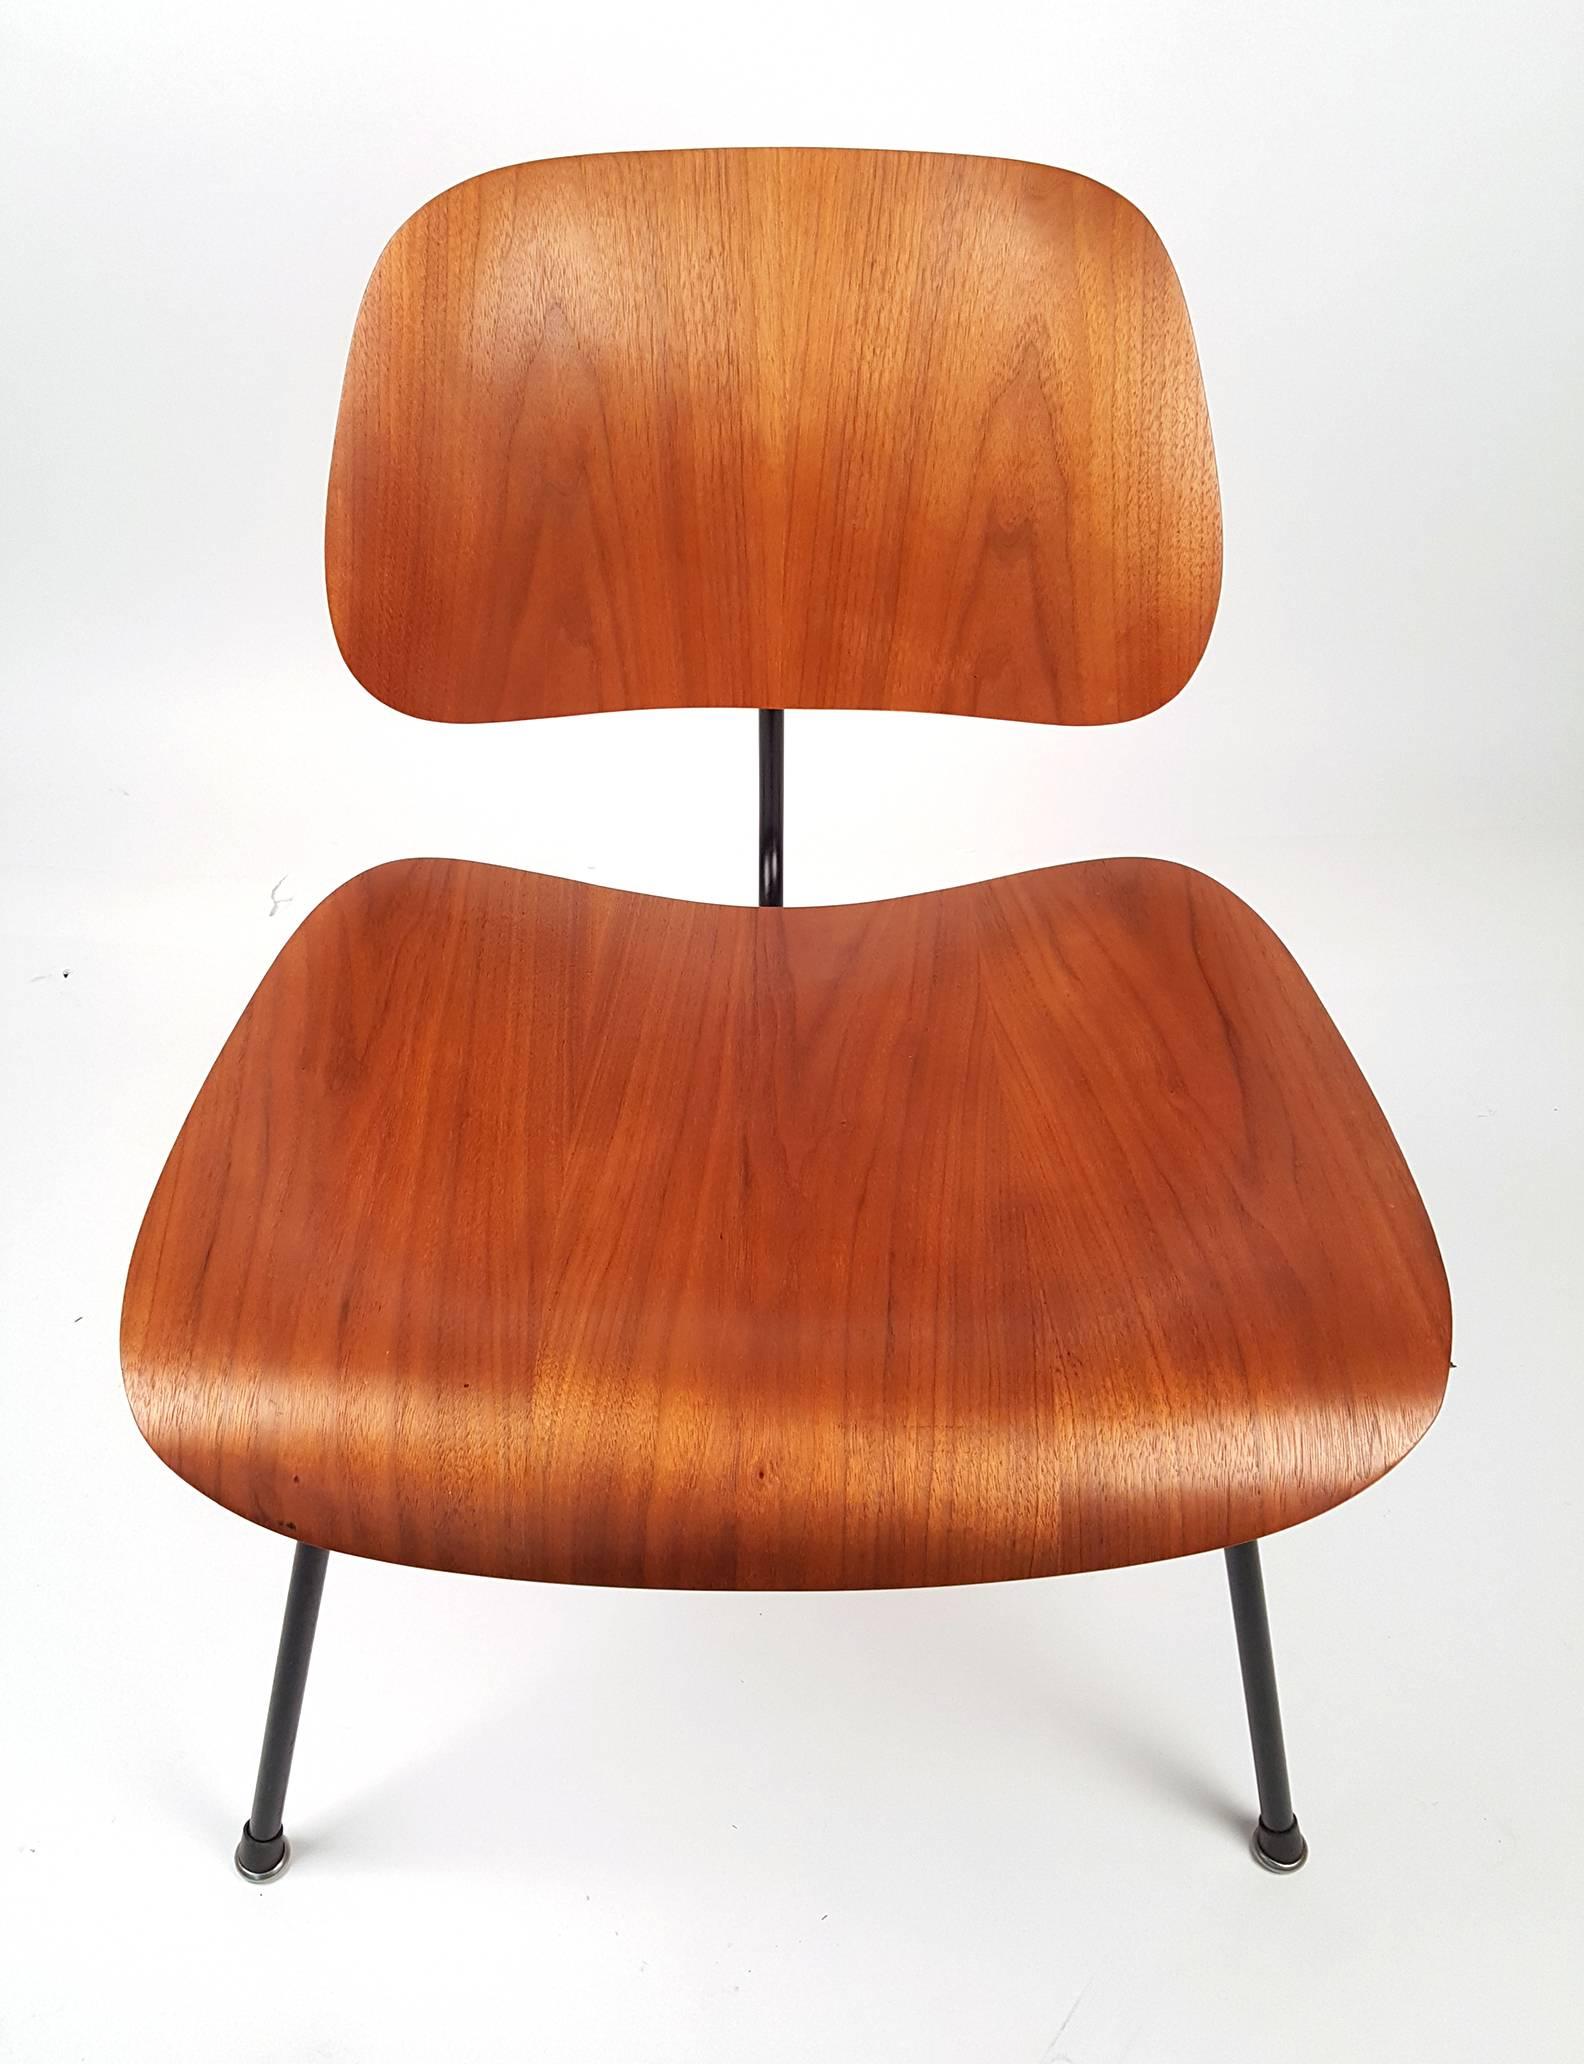 Mid-Century Modern Charles Eames LCM Chair for Herman Miller, 1950s walnut and black